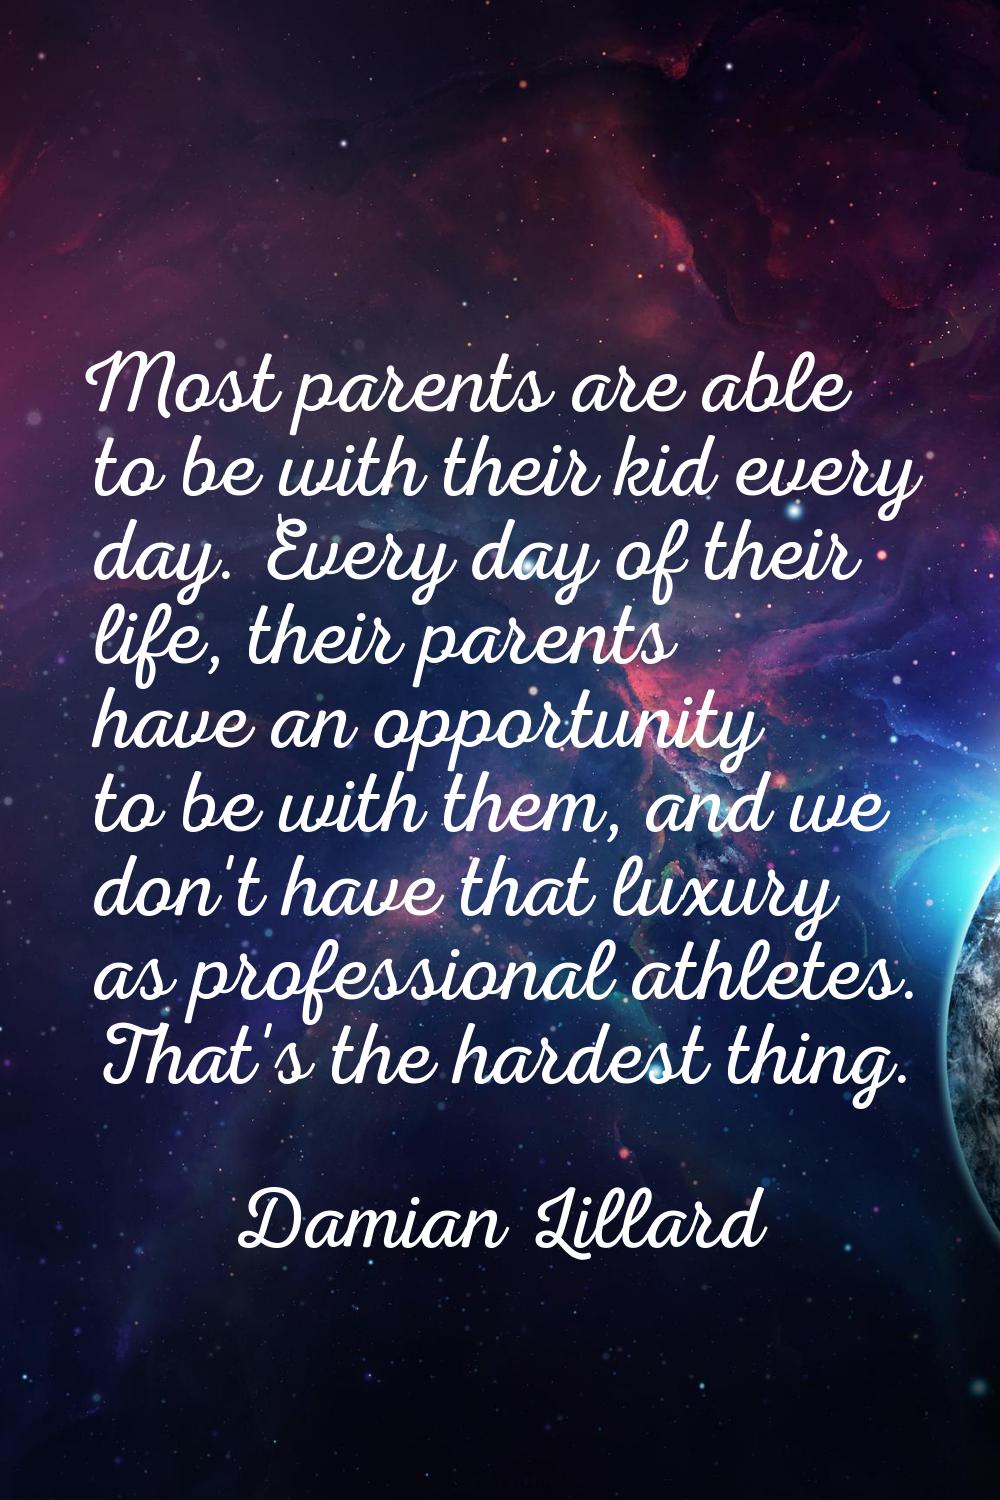 Most parents are able to be with their kid every day. Every day of their life, their parents have a